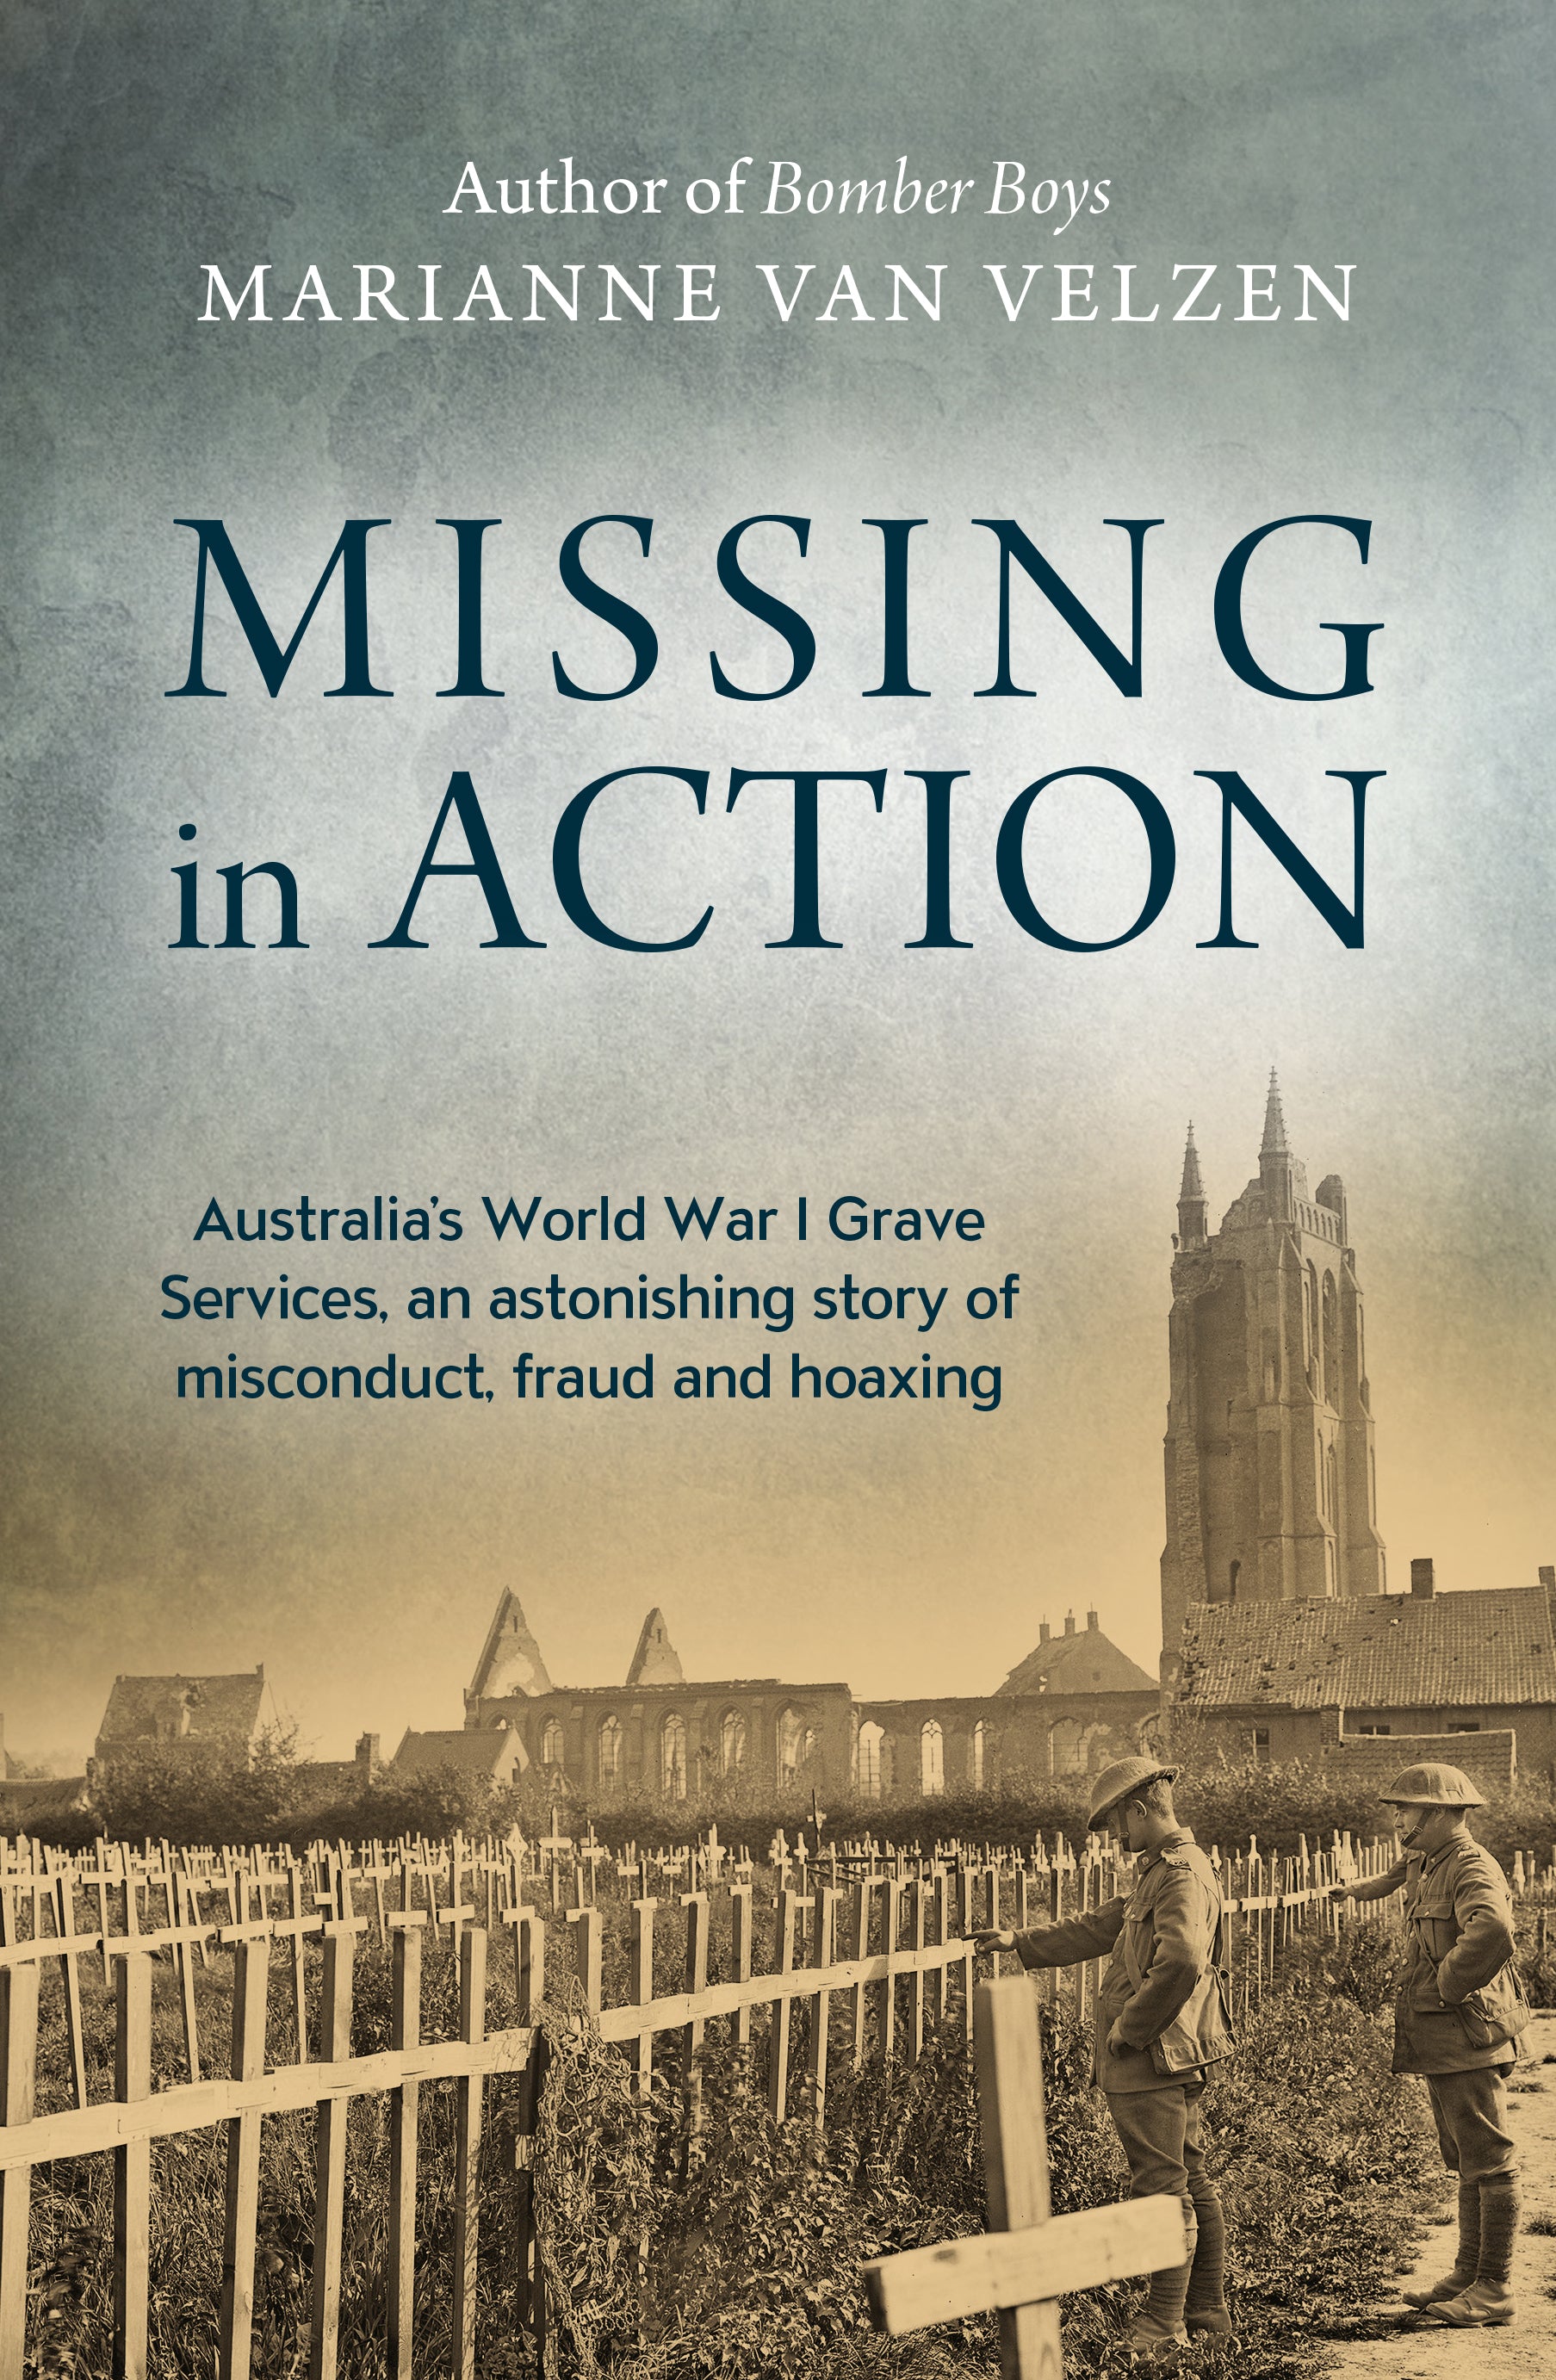 Missing in Action: Australia’s World War I Grave Services, an Astonishing Story of Misconduct, Fraud and Hoaxing